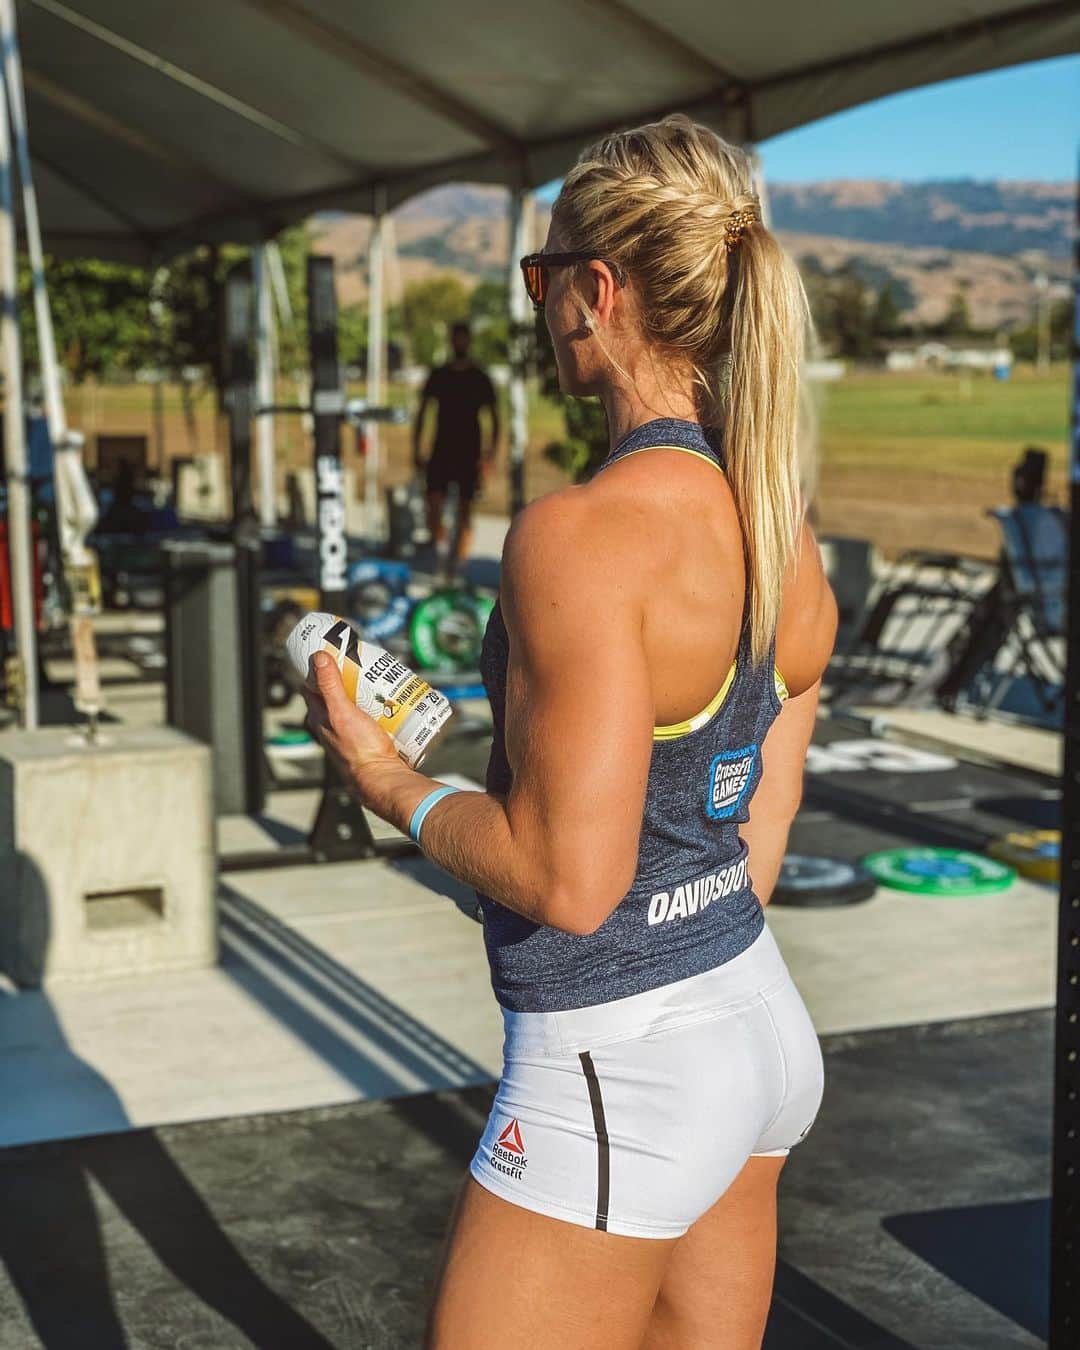 Katrin Tanja Davidsdottirのインスタグラム：「RECOVERY thursday ✨🙌🏼☺️🤍 // @ascent_protein (AND throwback thursday to CF Games week!!) - Ahhh, I just love a well earned recovery day. Been SUCH great couple weeks of training with the new @comptrain.co academy setup, having @amandajbarnhart, @samuelkwant & @_emmagardner_cf to train with every day (waiting on @colesager35 🤩) & our coaches to guide us. Not that it’s easy by any means but it’s never been this EASY to work hard!!!!! Environment really is gold & just so incredibly thankful for this environment we have created here in Bos. - Baaaaaack to my recovery thursday hehe: I don’t like completely resting so I’ll get in a movement of some sort in the am, today going to get my body OUTSIDE & then I’ll jog or walk whatever feels good to me in that moment. ☺️☀️🤝 Preferebly with this @ascent_protein tecovery water (Fruit punch flavor today + ice = just pure wonder!) Hope you all are having an incredible day too! xxx」